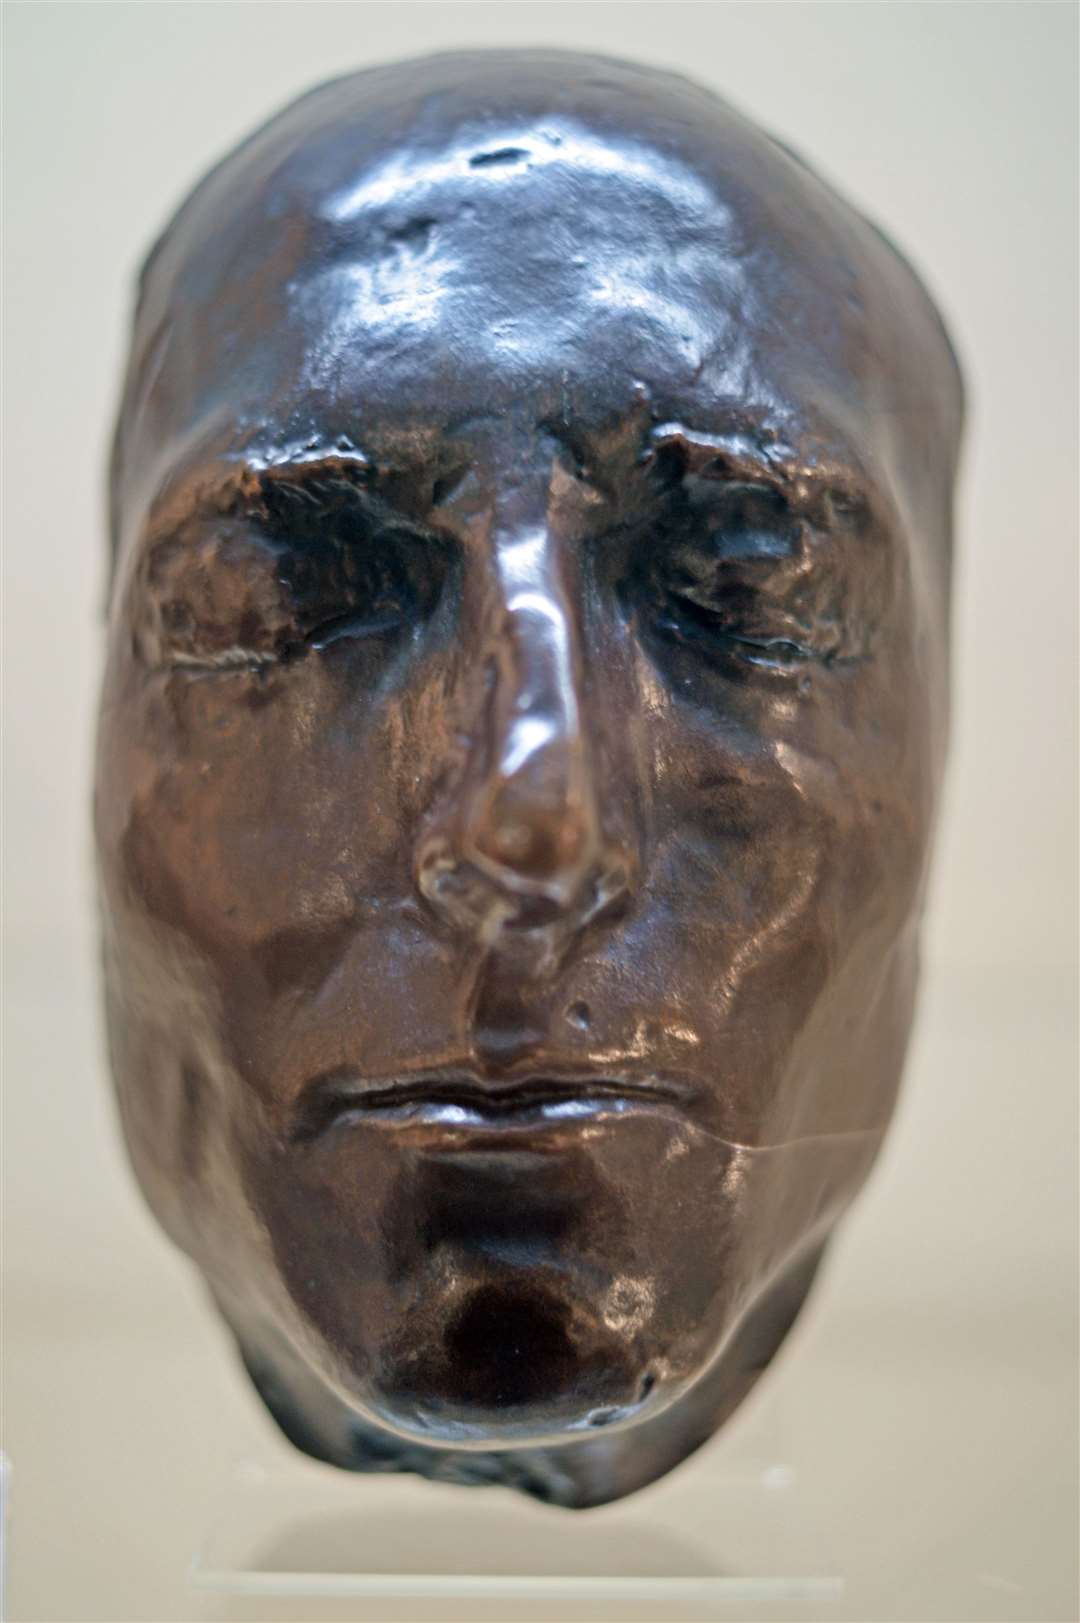 Bonnie Prince Charlie's death mask pictured at Inverness Museum.